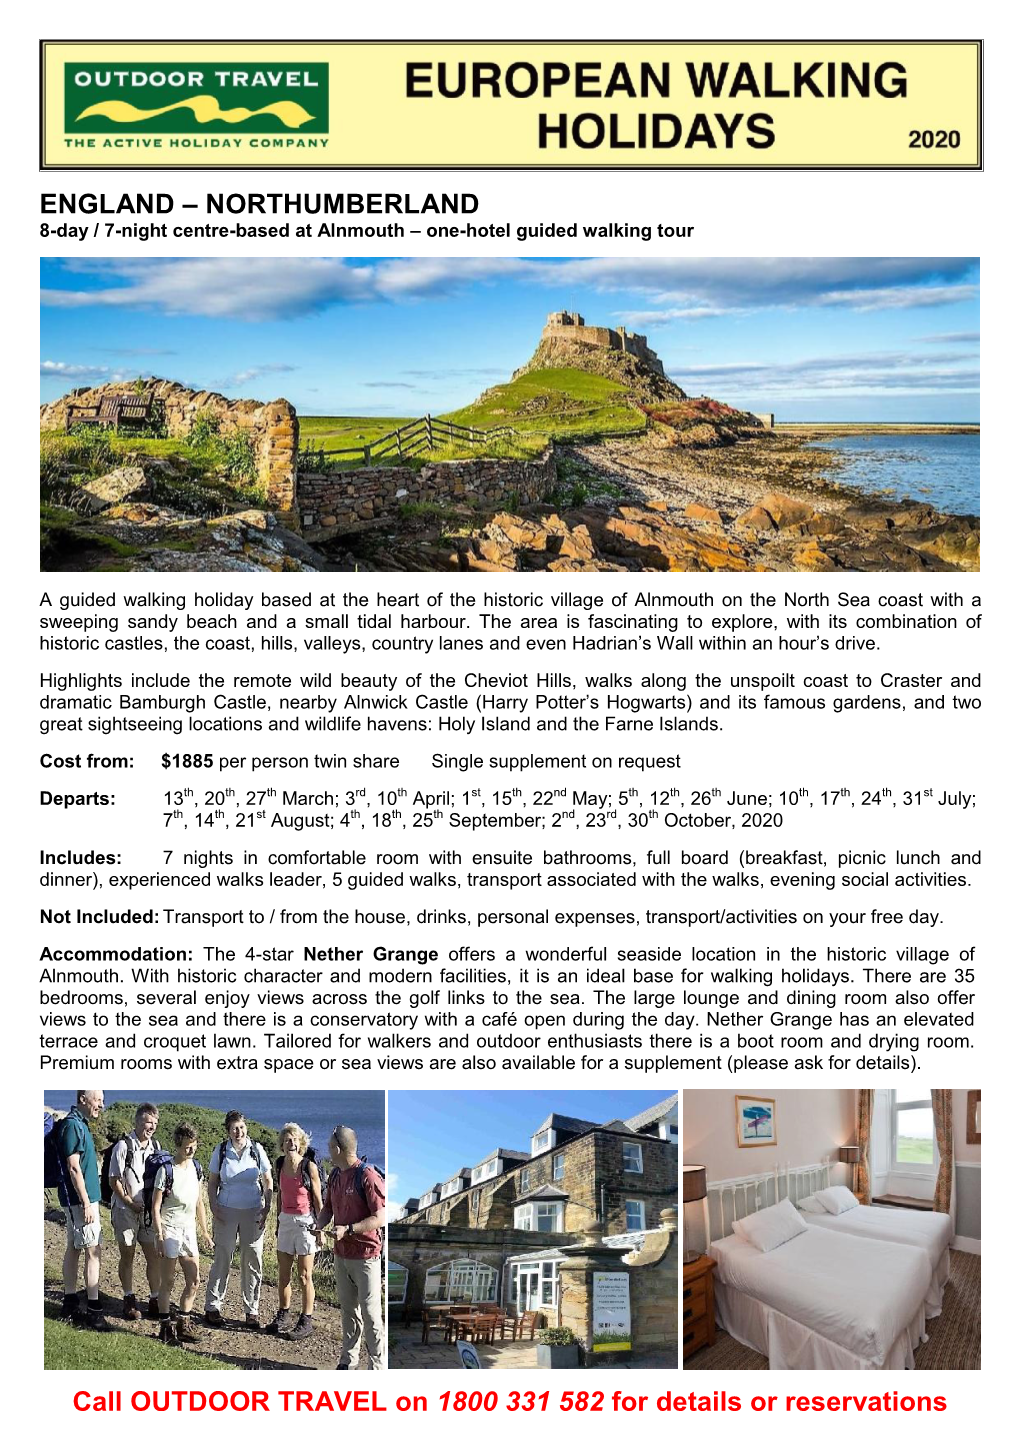 ENGLAND – NORTHUMBERLAND 8-Day / 7-Night Centre-Based at Alnmouth – One-Hotel Guided Walking Tour